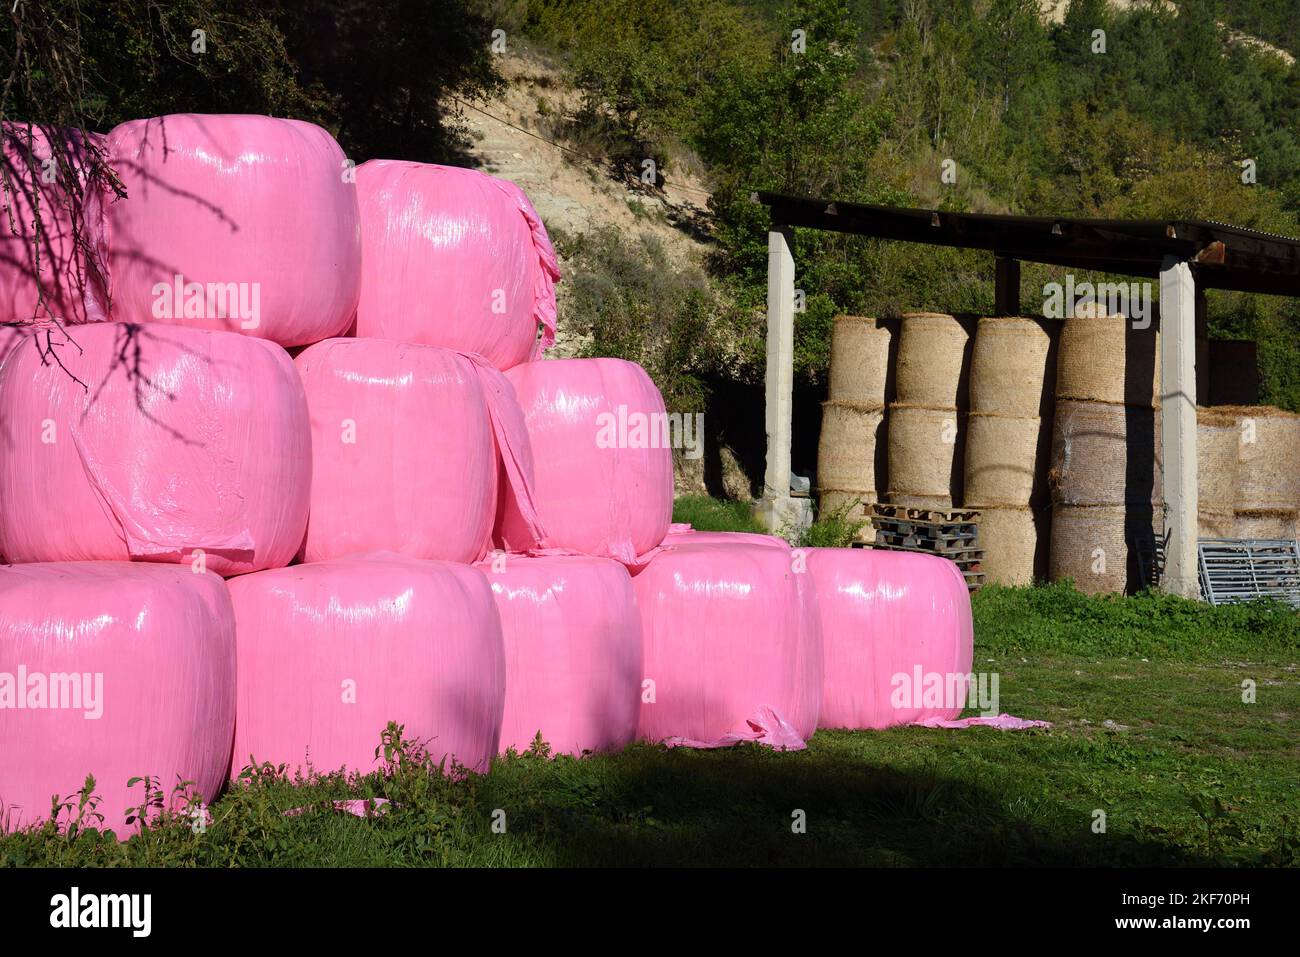 Pink Hay Bales or Straw Bales Covered in Shocking Pink Plastic or Polythene and Hay Barn on Farm in the Alpes-de-Haute-Provence France Stock Photo